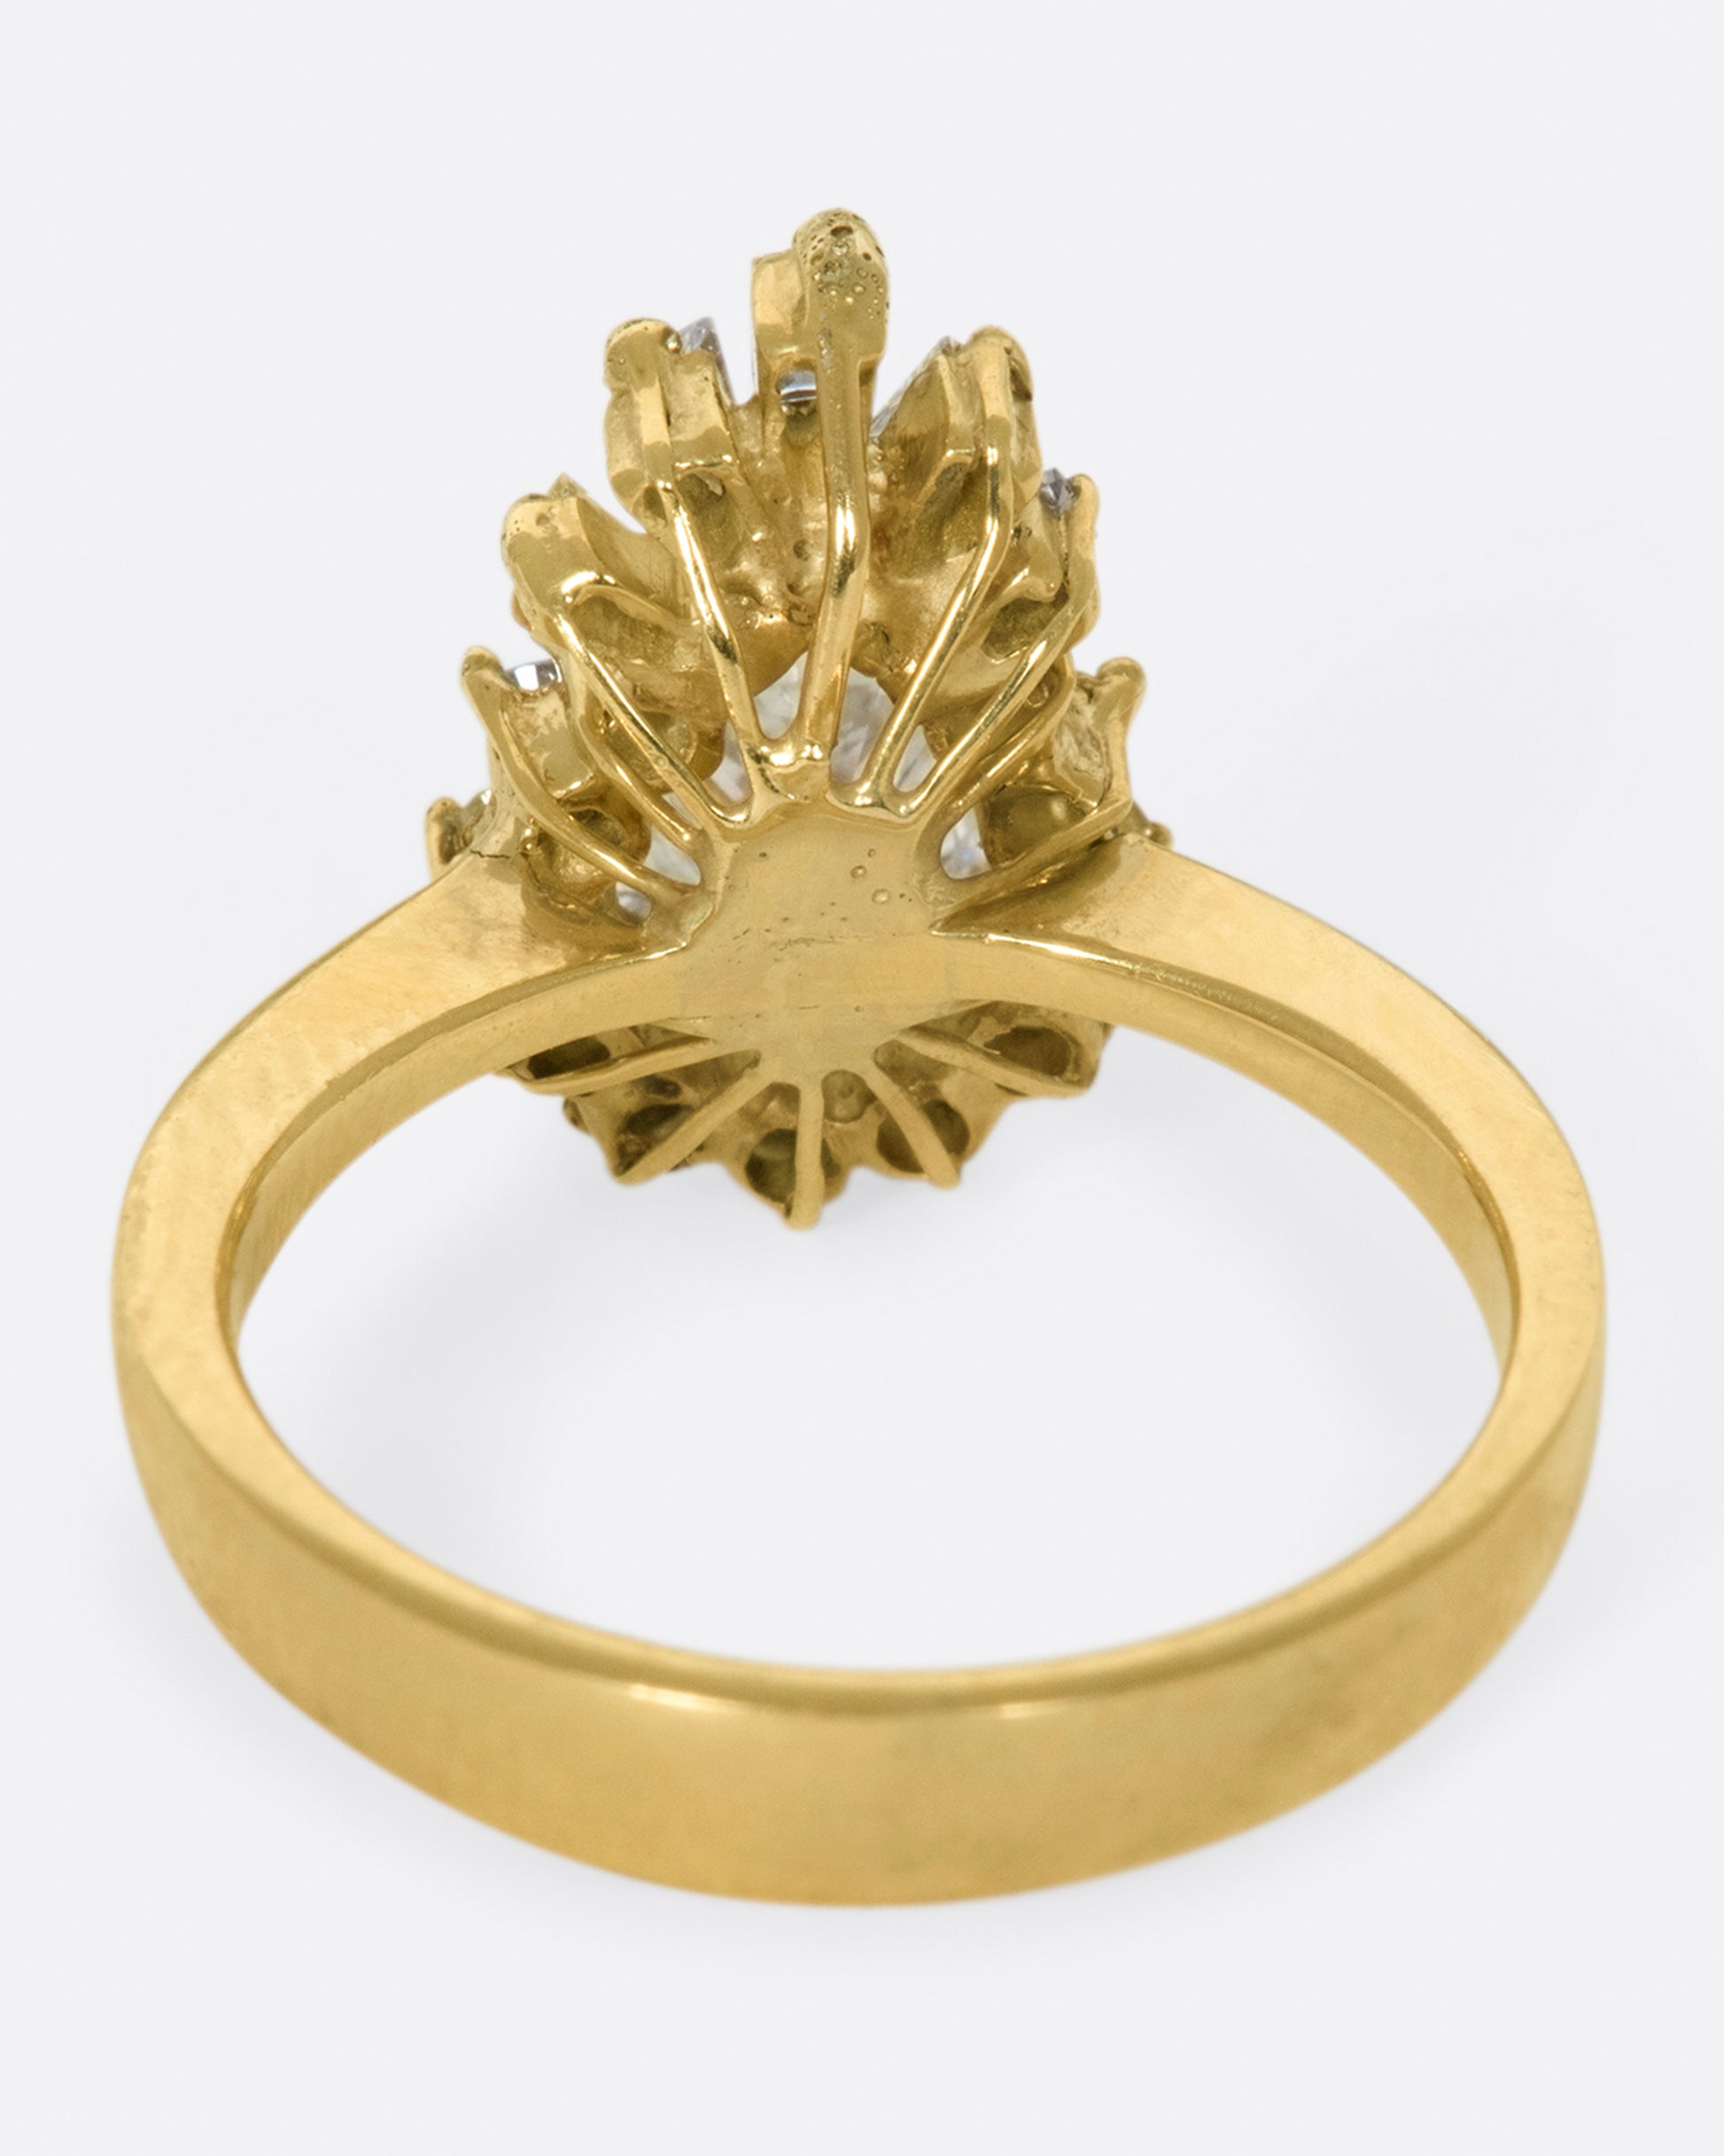 A tapered ring with a pale yellow, pear shaped diamond at its center with a round and baguette diamond halo.